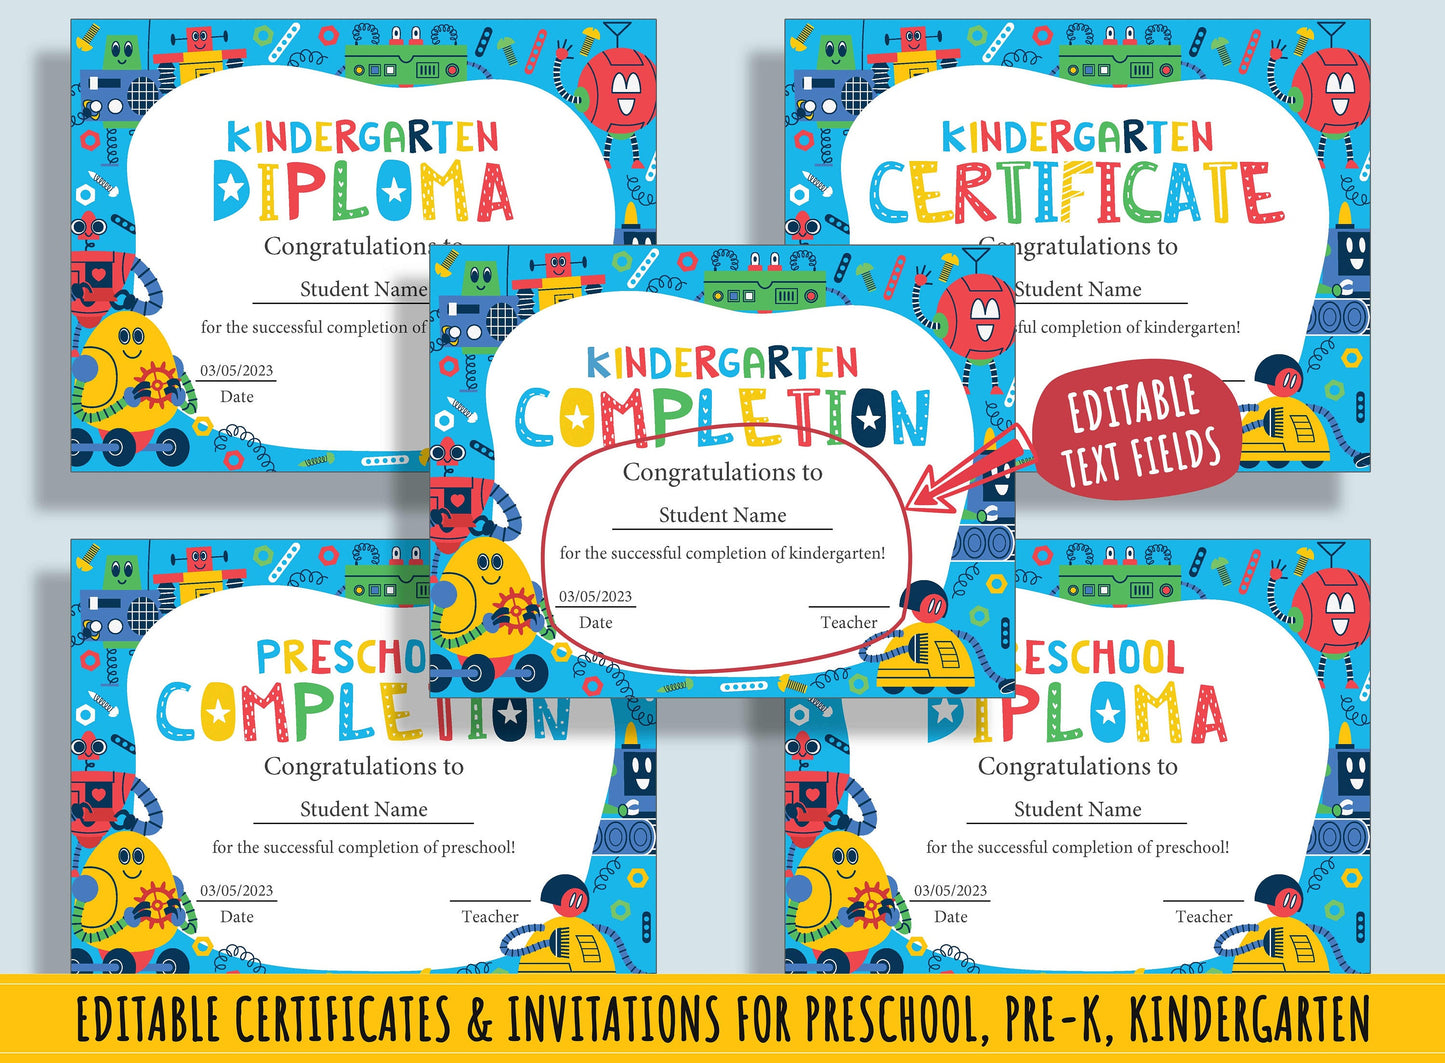 Little Learner's Diploma, Certificate, Invitation Collection: 37 Editable Pages for Preschool & Kindergarten Graduation, Instant Download